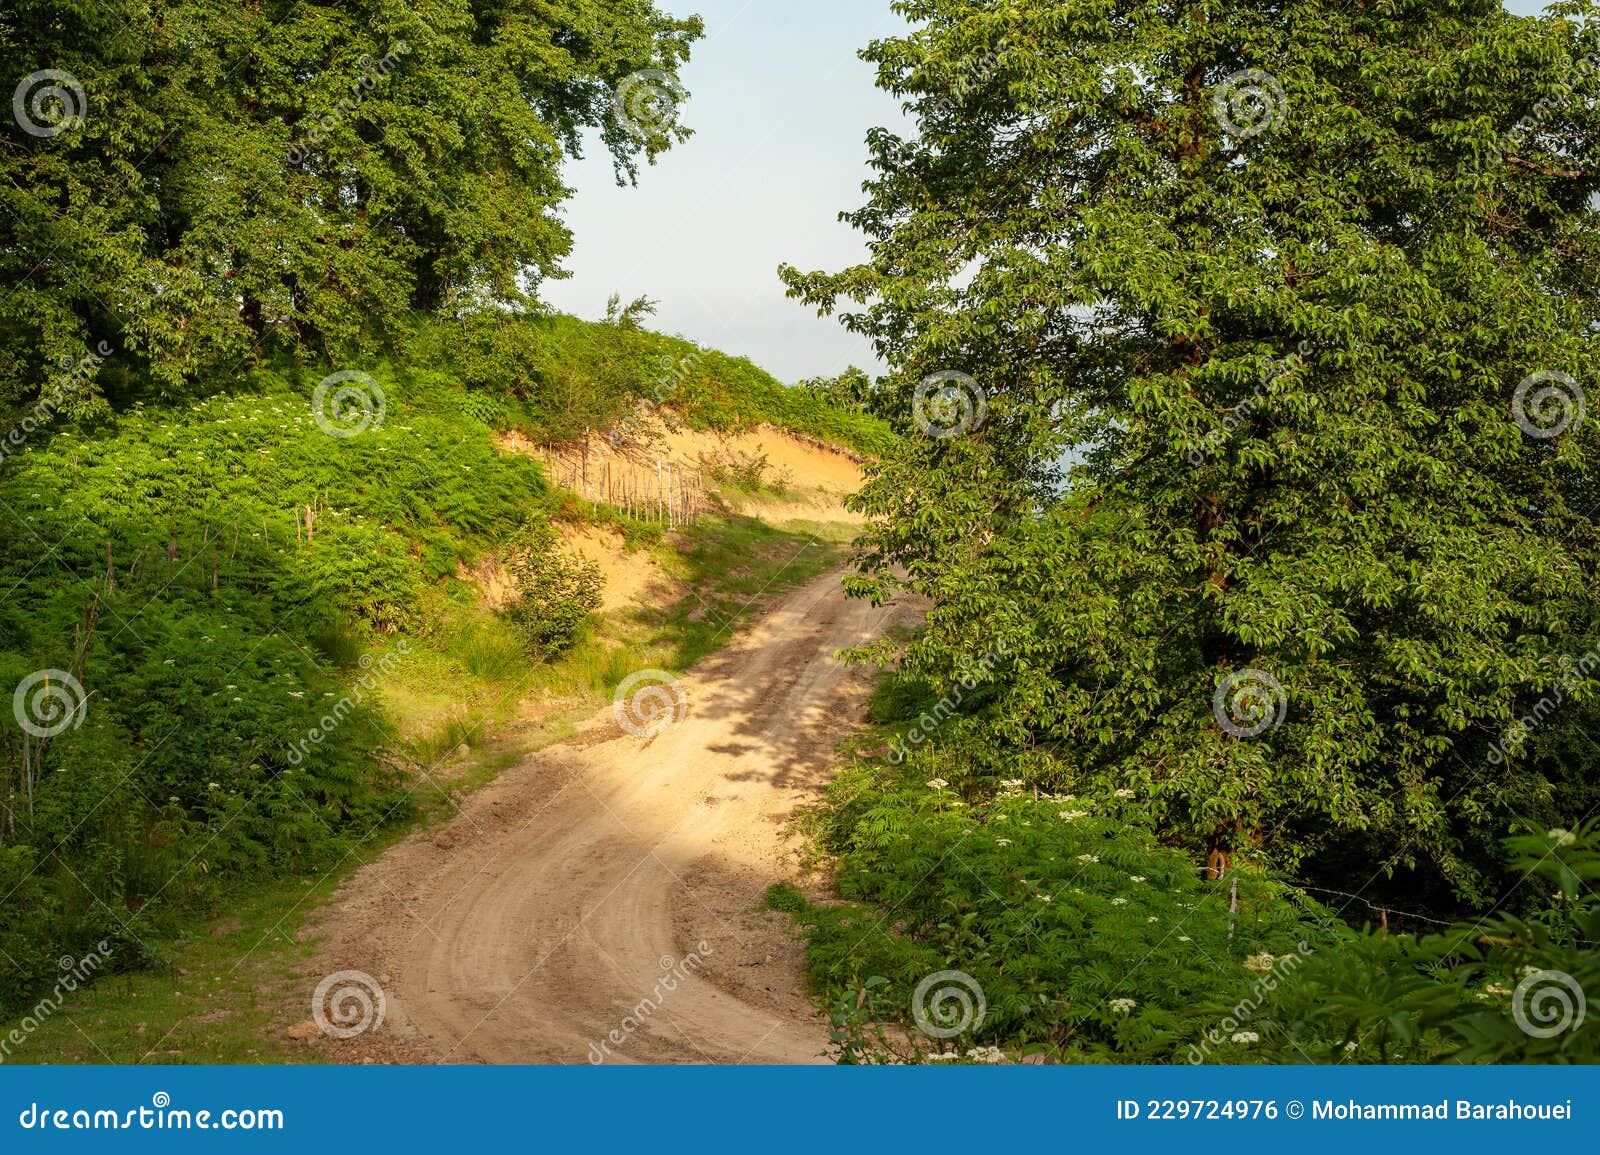 the view of countryside dirt road with alder trees